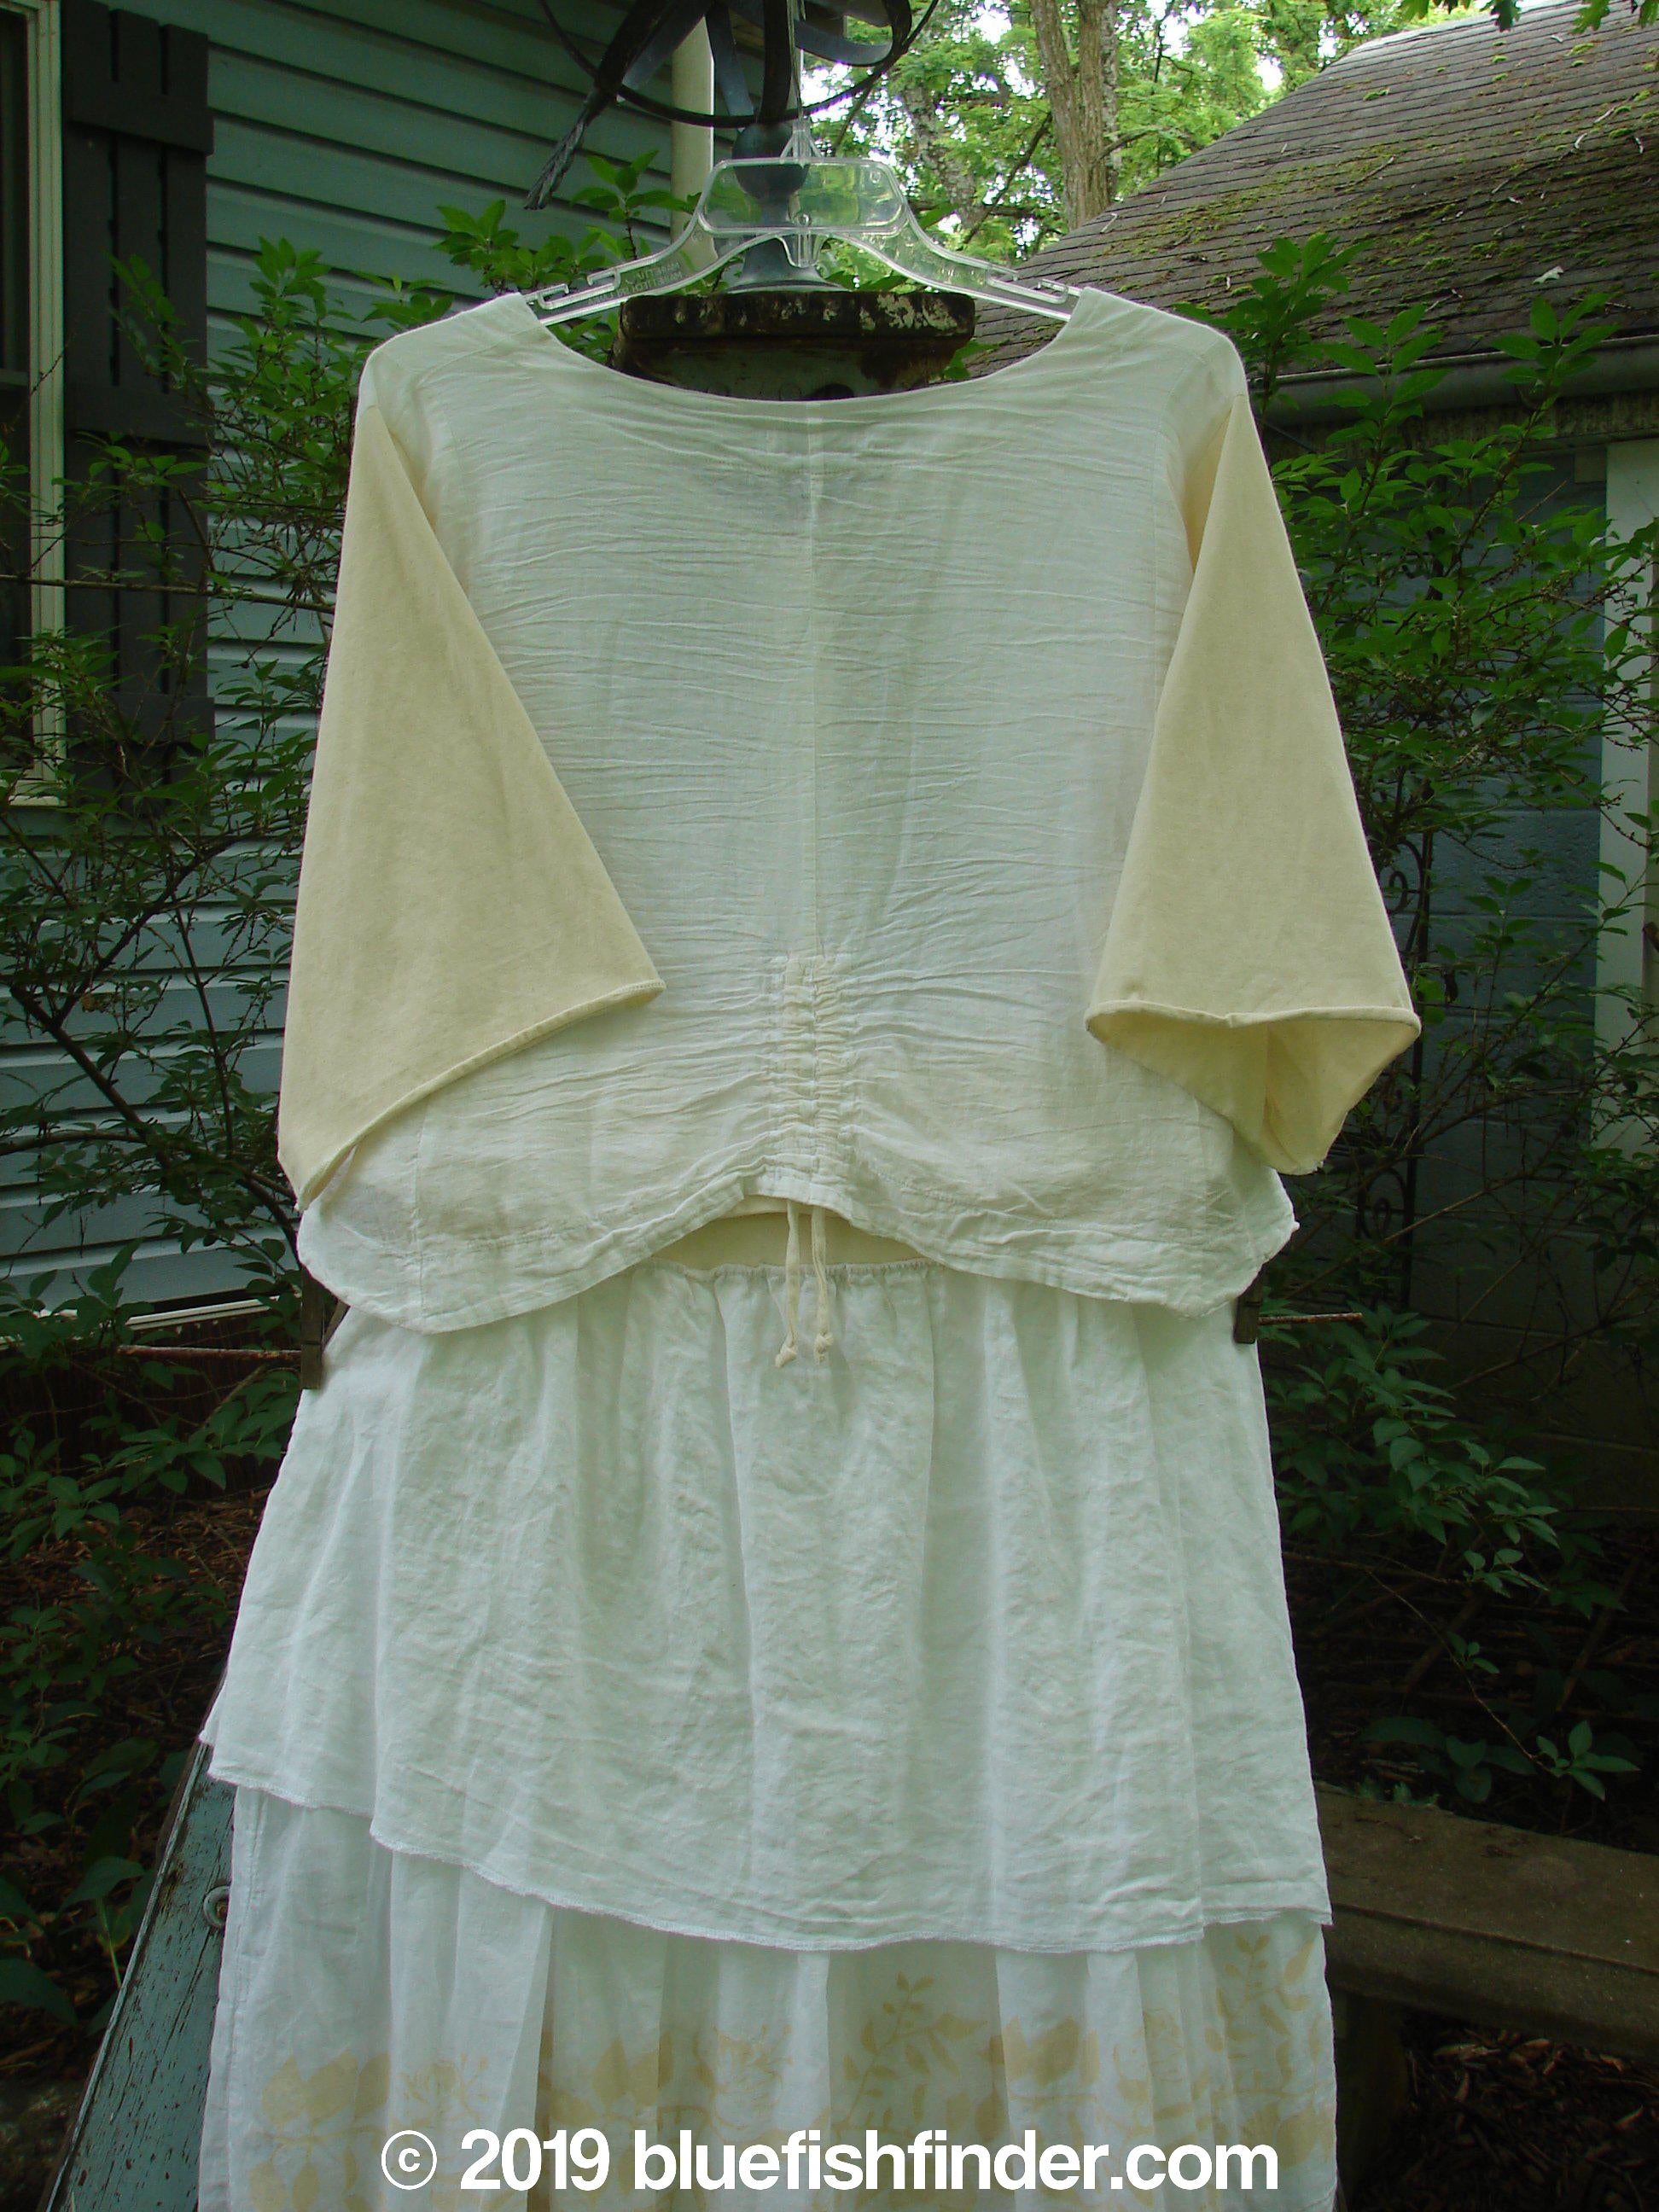 A white dress with long sleeves and a wider, boxier crop shape. Features include a three-button front, three-quarter length cotton sleeves, and vertical pull cord accents. The dress is part of the Barclay NWT Batiste Draw Midi Meadow Trio in White, Size 2.